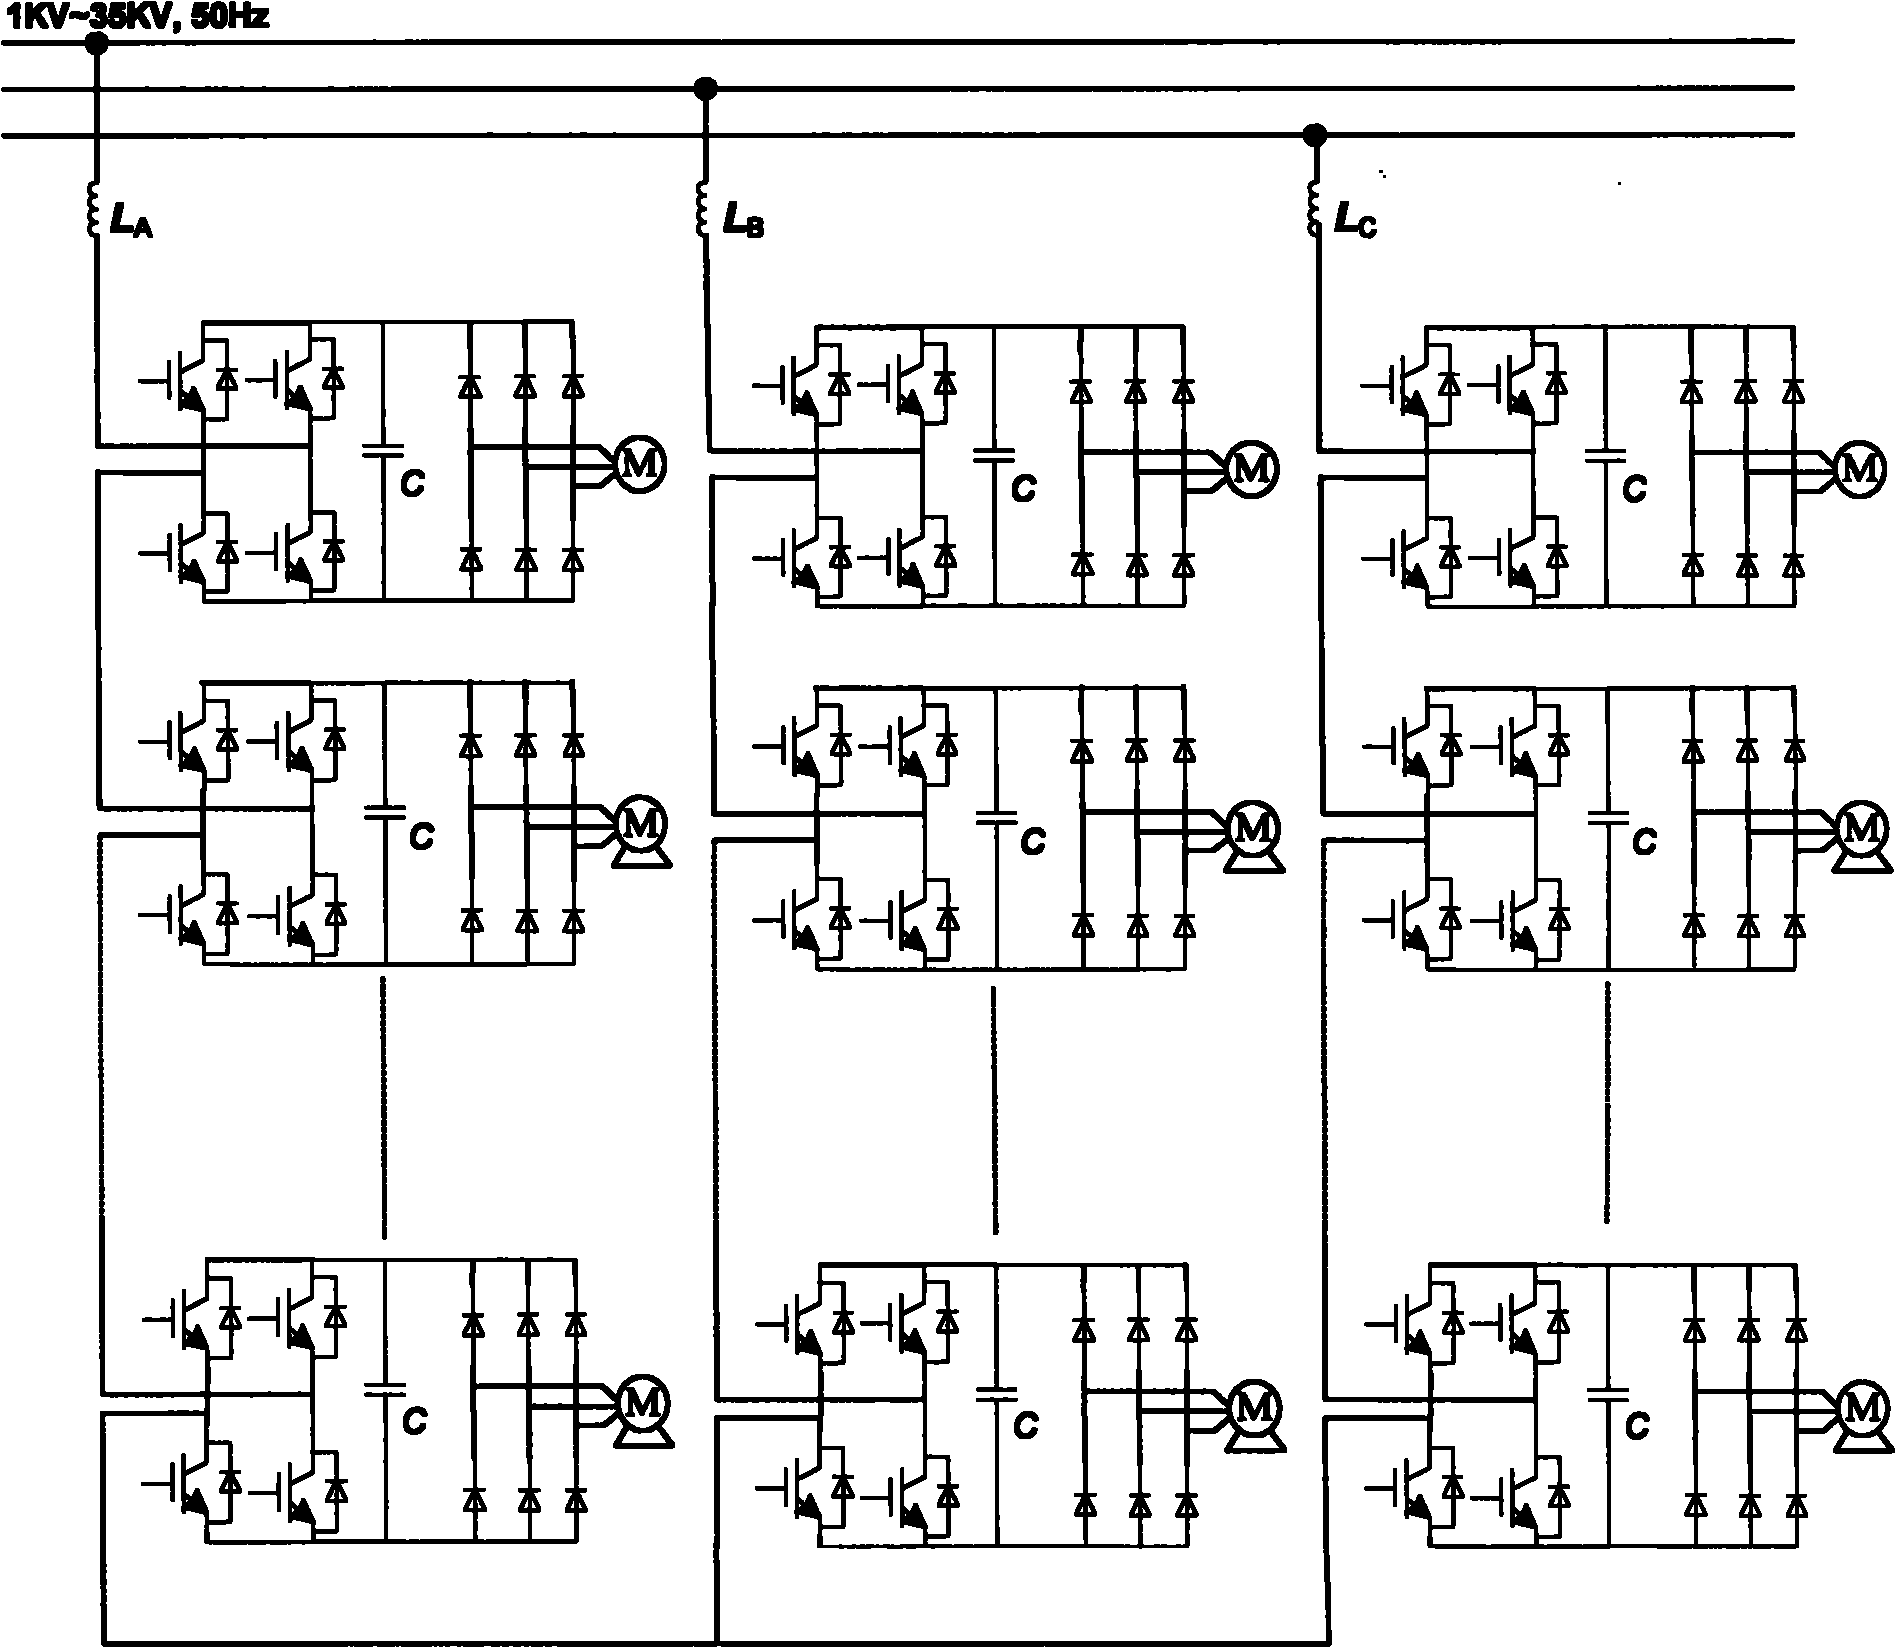 Grid-connected topology structure without transformer based on H-bridge used for wind power generation